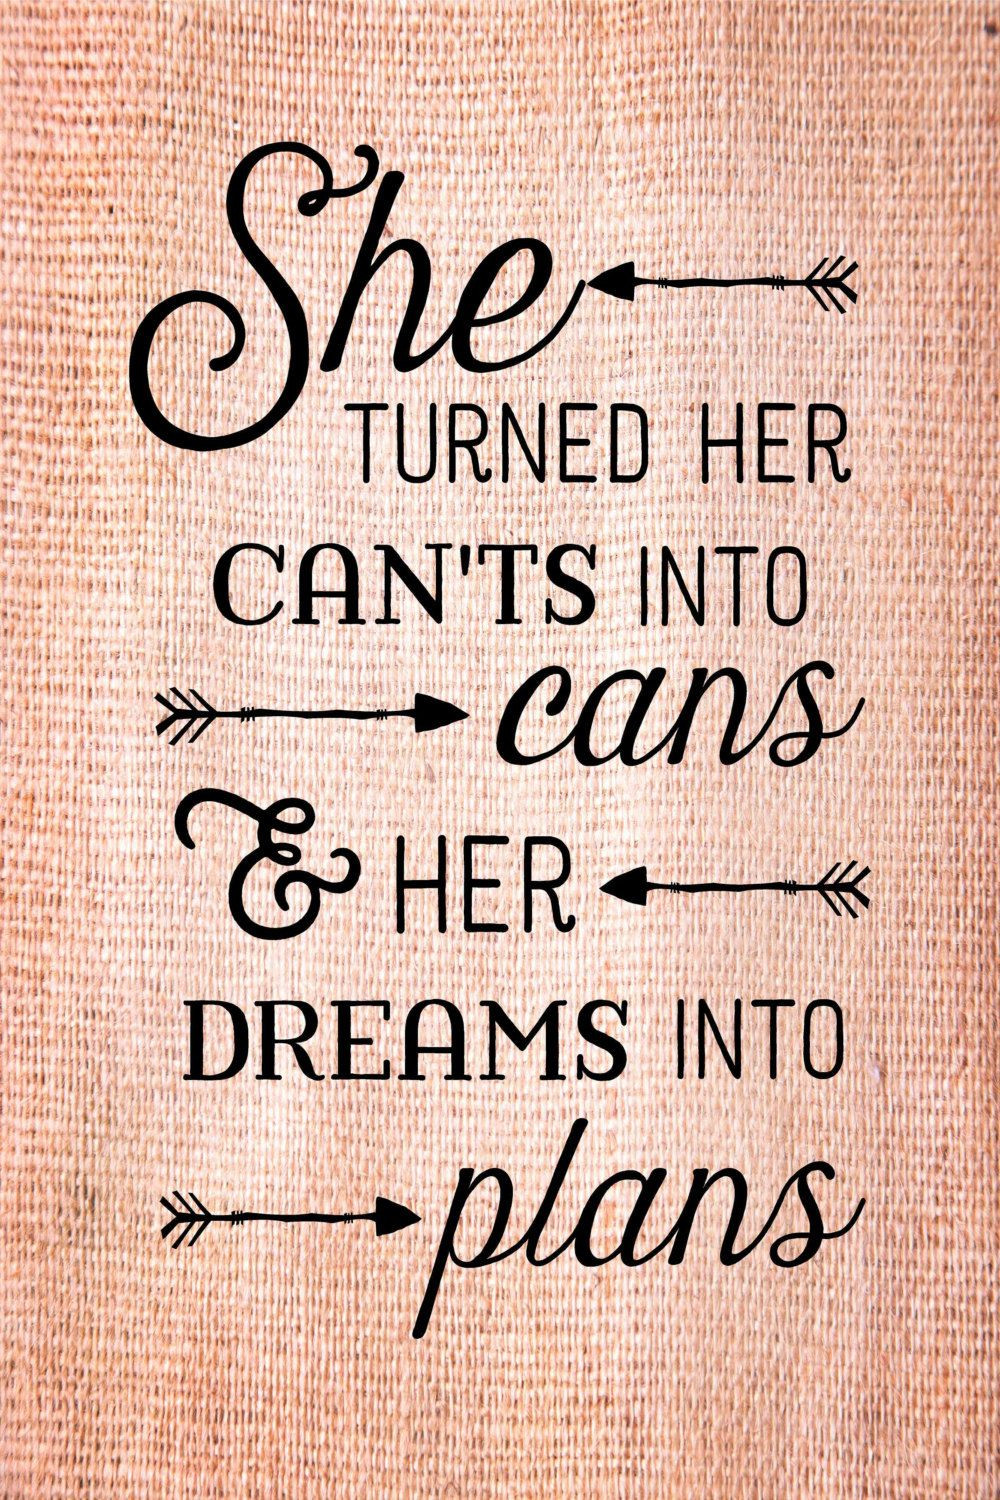 Quotes About Graduation
 Graduation Gift She turned her can ts into cans dreams